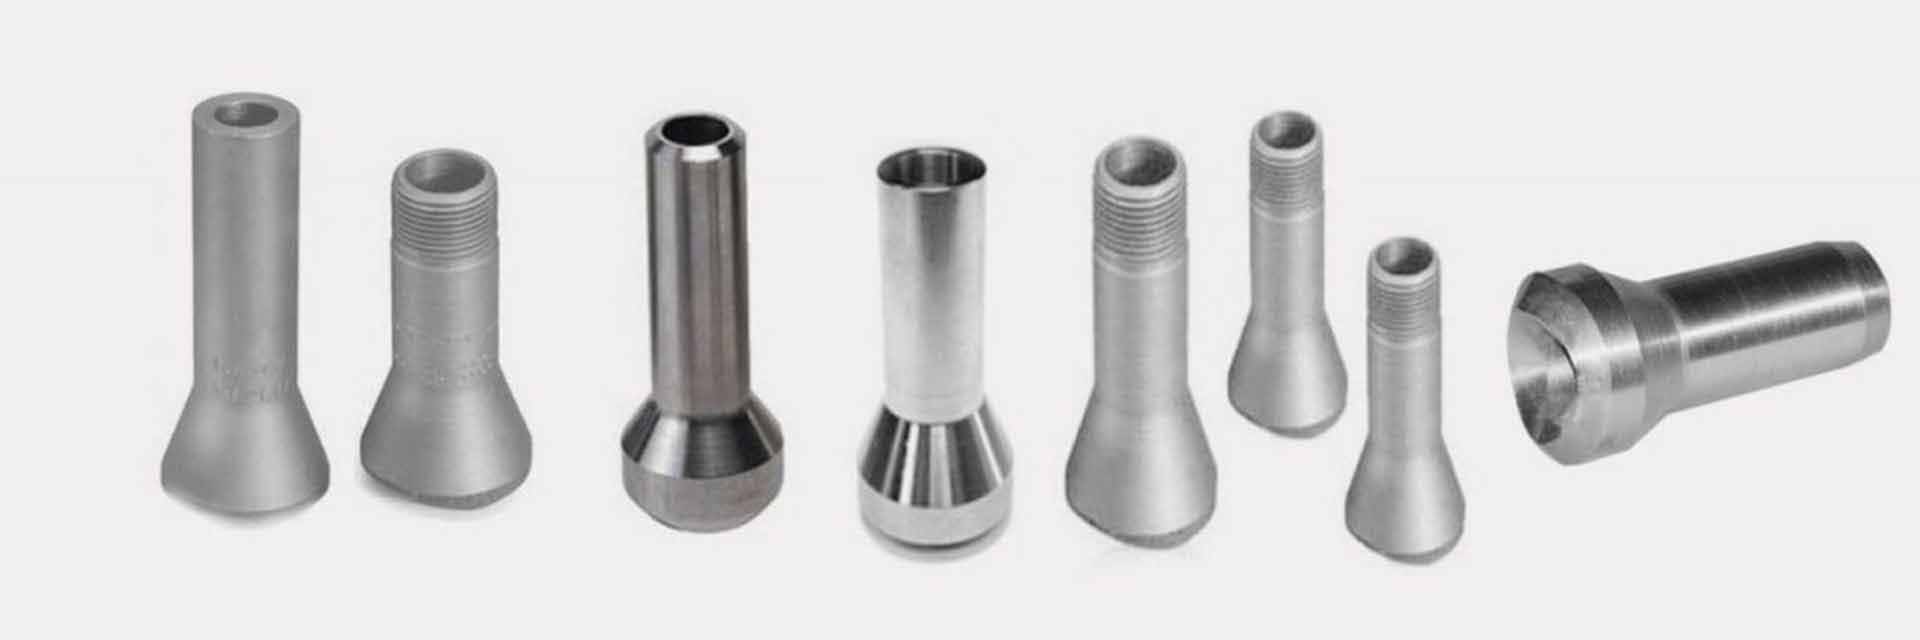 Nipolets Supplier in India